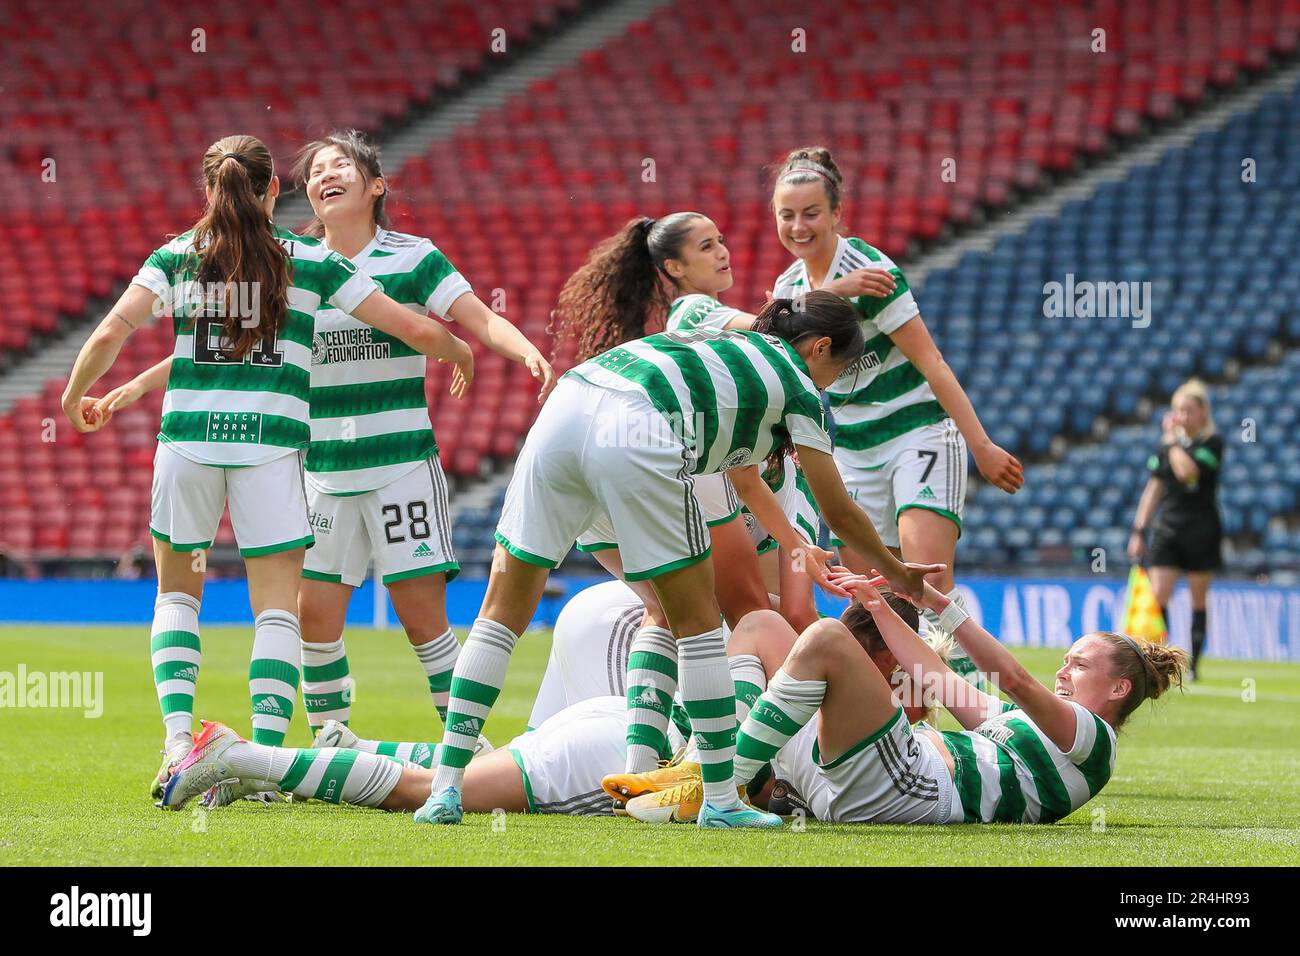 Glasgow, UK. 28th May, 2023. In the final of the Womens Scottish Cup in a game between Celtic and Rangers, Celtic won 2 - 0. The scorers were Natasha Flint, number 26, in 64 minutes and Claire O'Riodan, number 3, in 68 minutes. Credit: Findlay/Alamy Live News Stock Photo